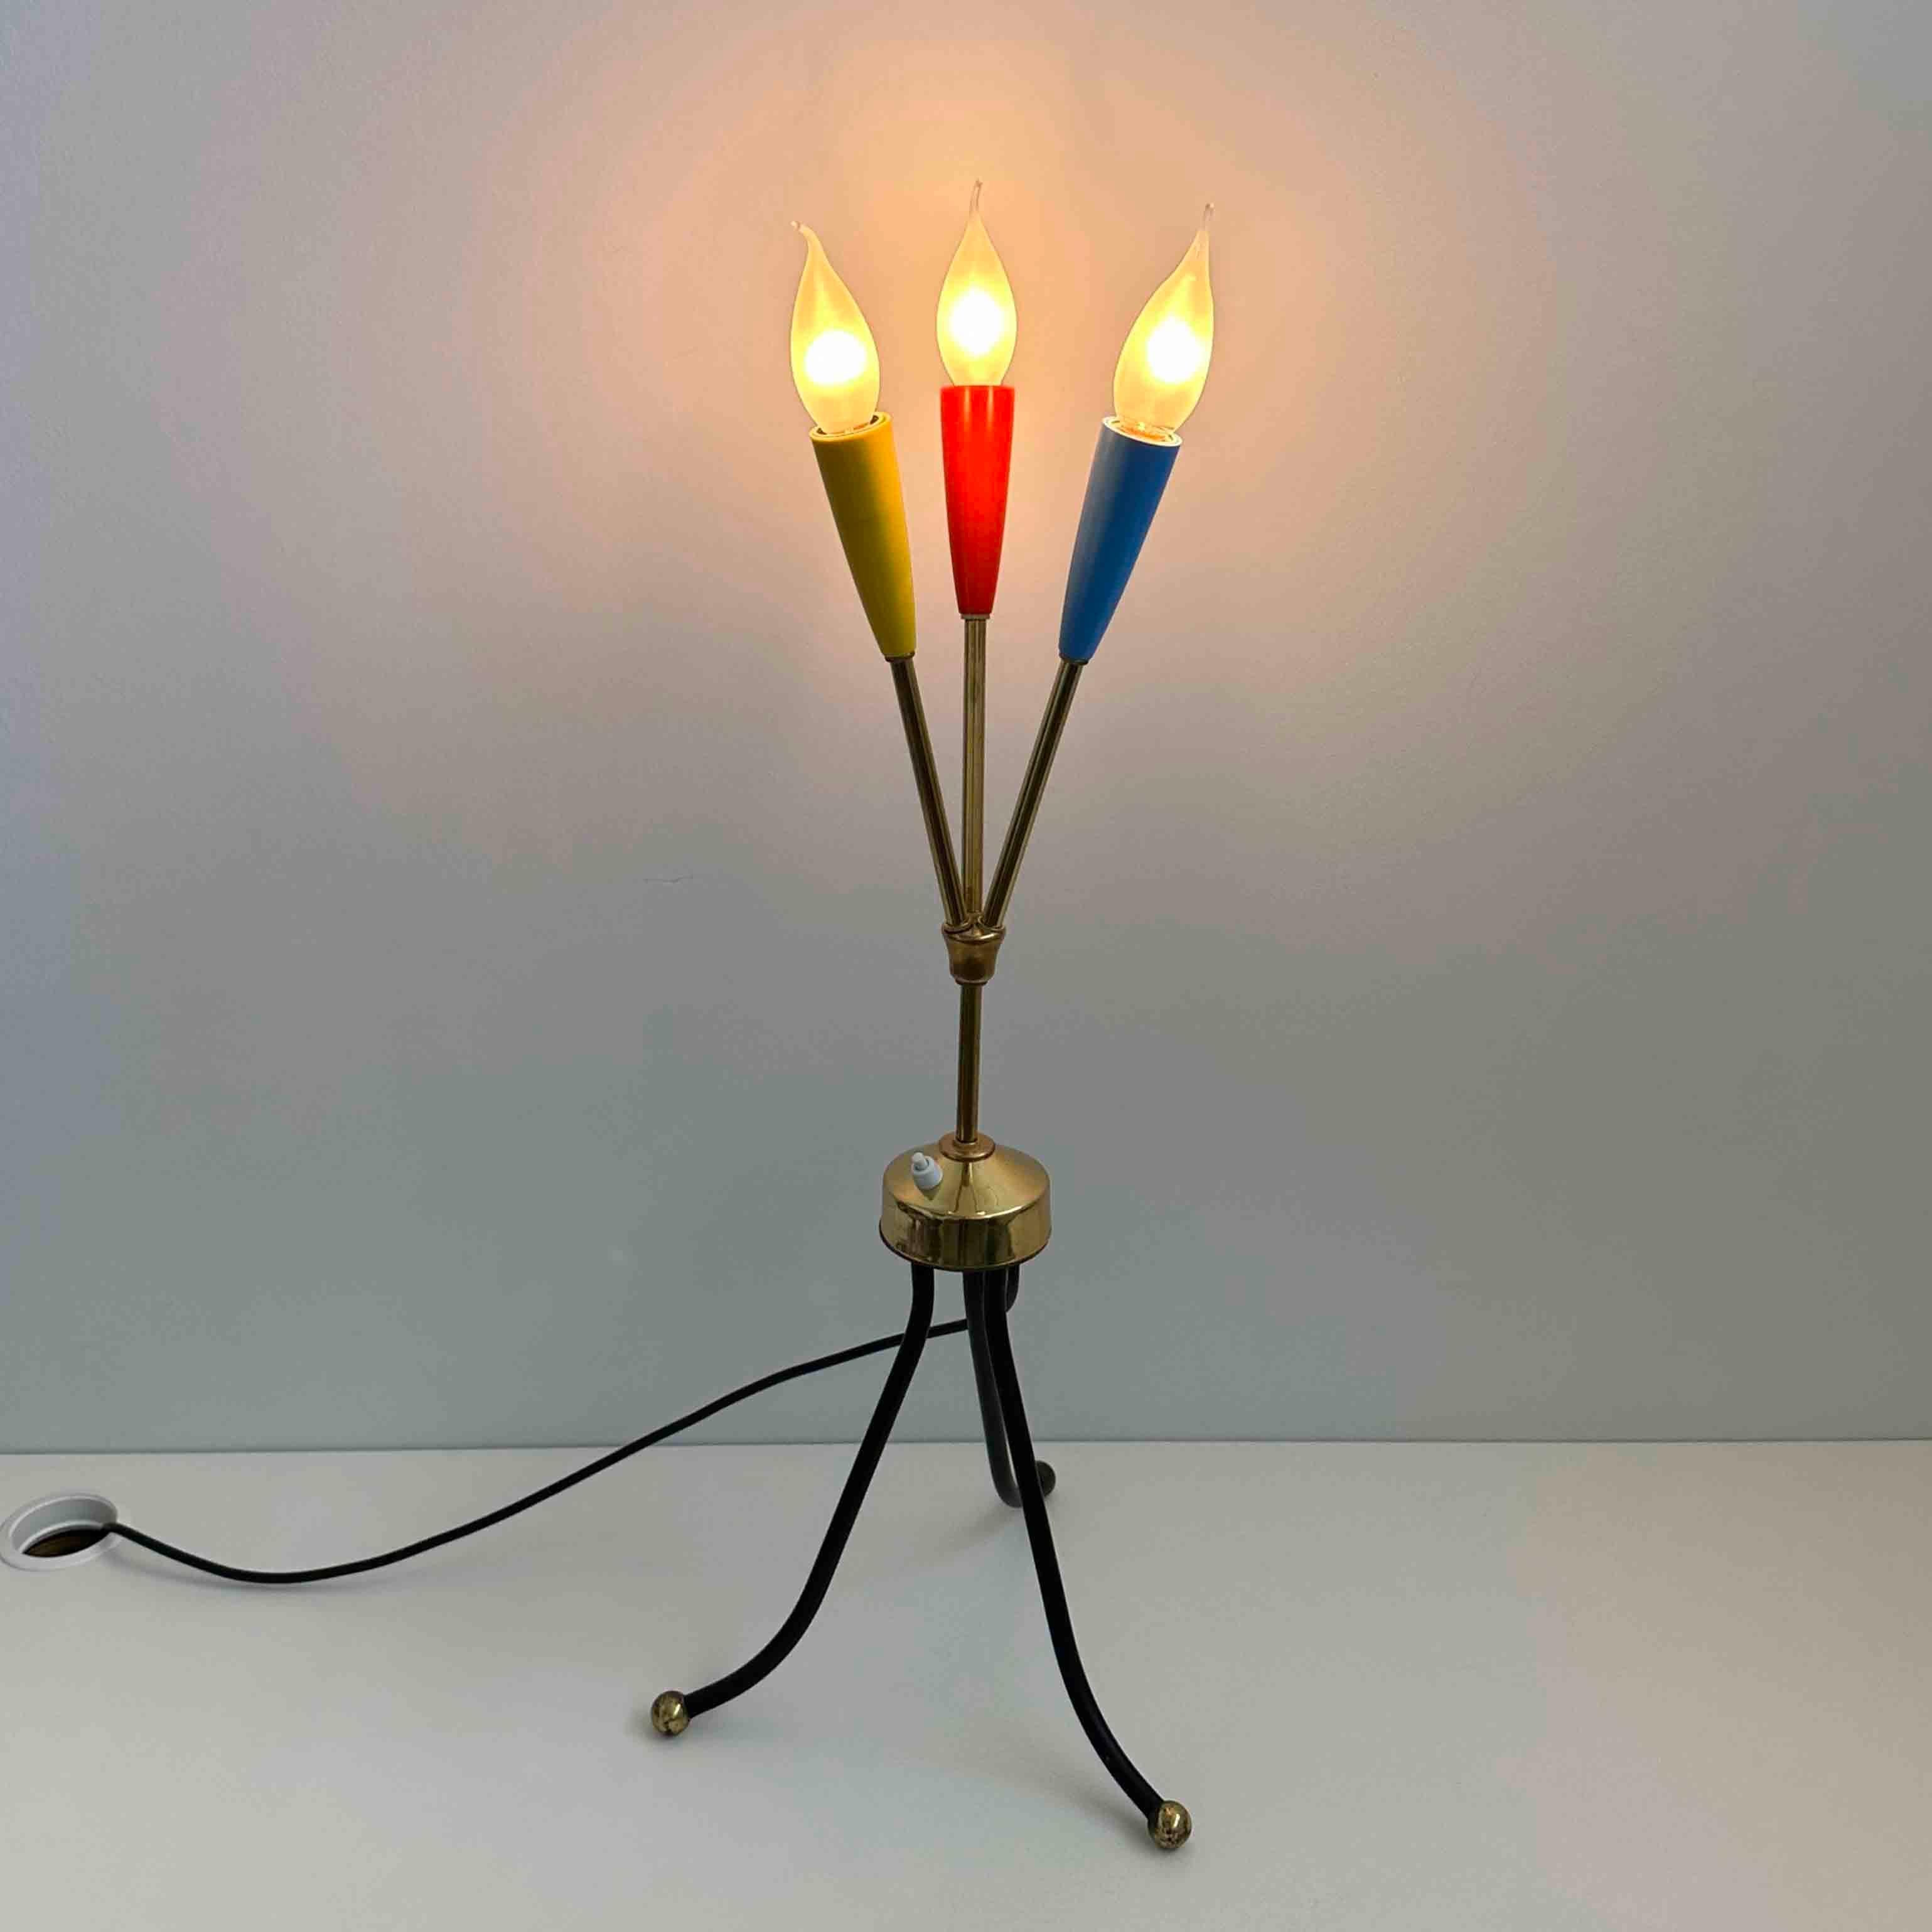 Space Age Table Lamp in Sputnik Style, Germany, 1960s For Sale